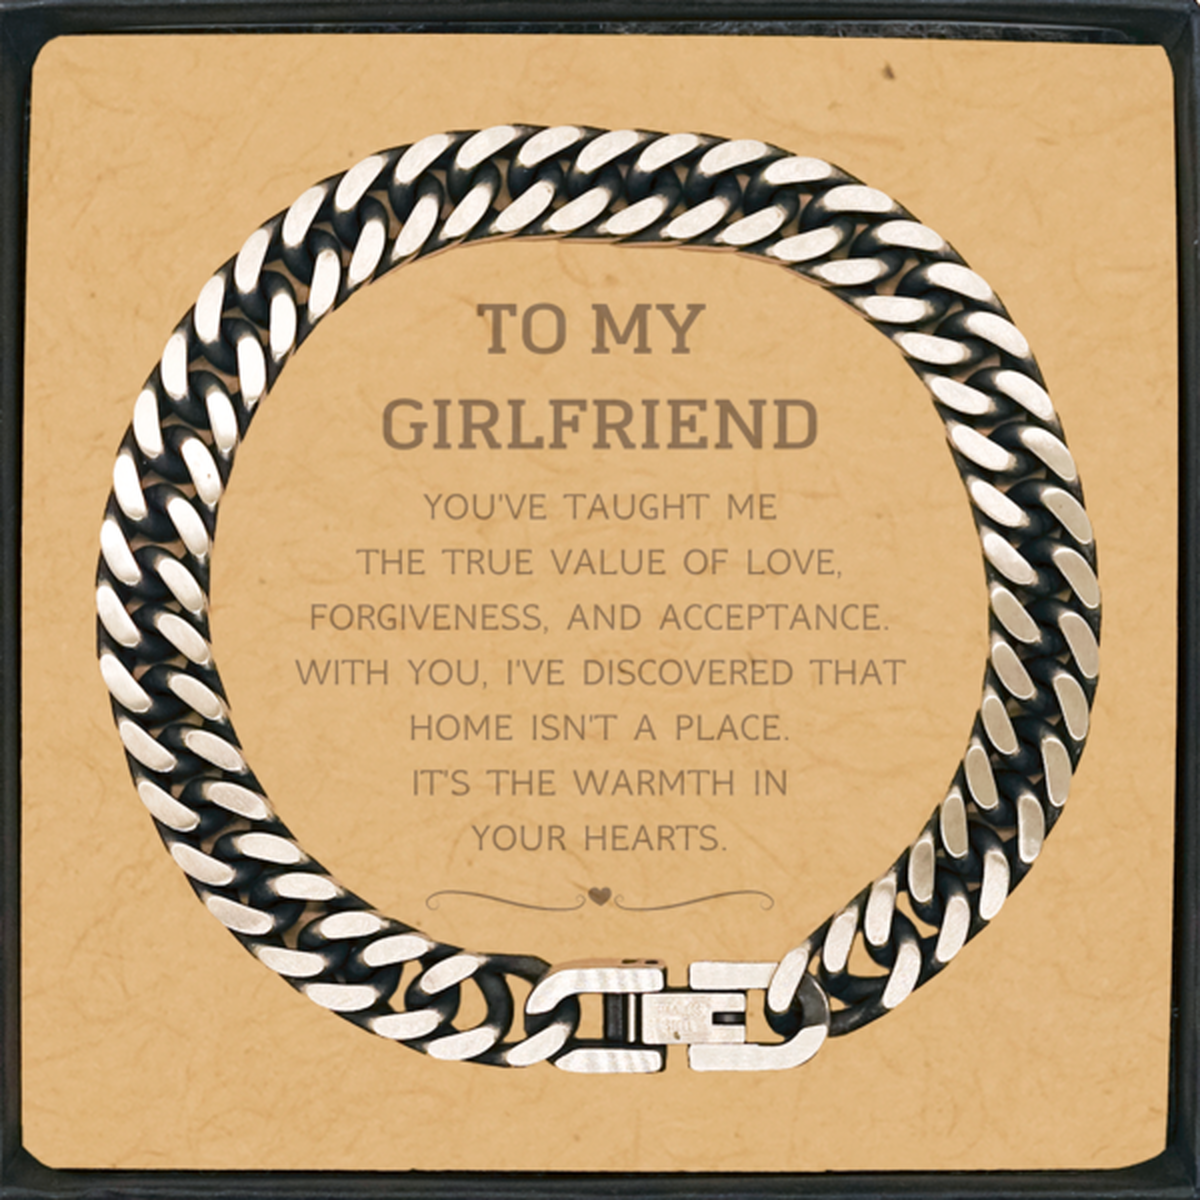 To My Girlfriend Gifts, You've taught me the true value of love, Thank You Gifts For Girlfriend, Birthday Cuban Link Chain Bracelet For Girlfriend